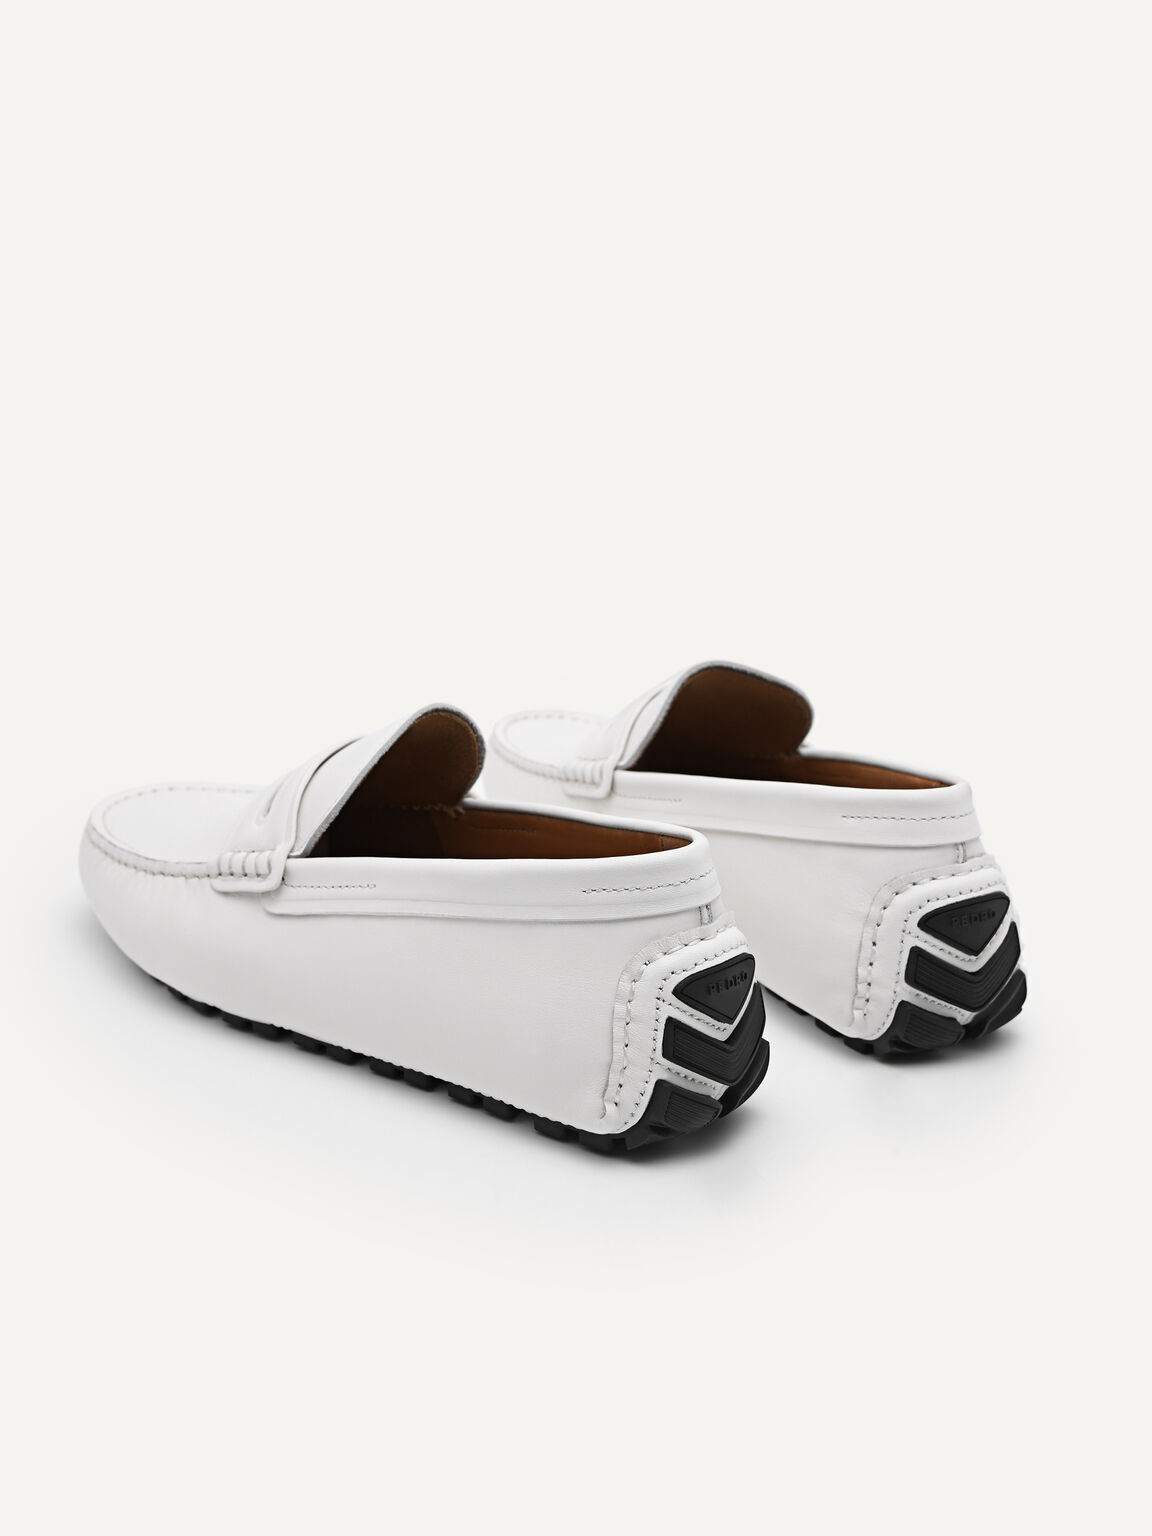 Leather Moccasins, White, hi-res